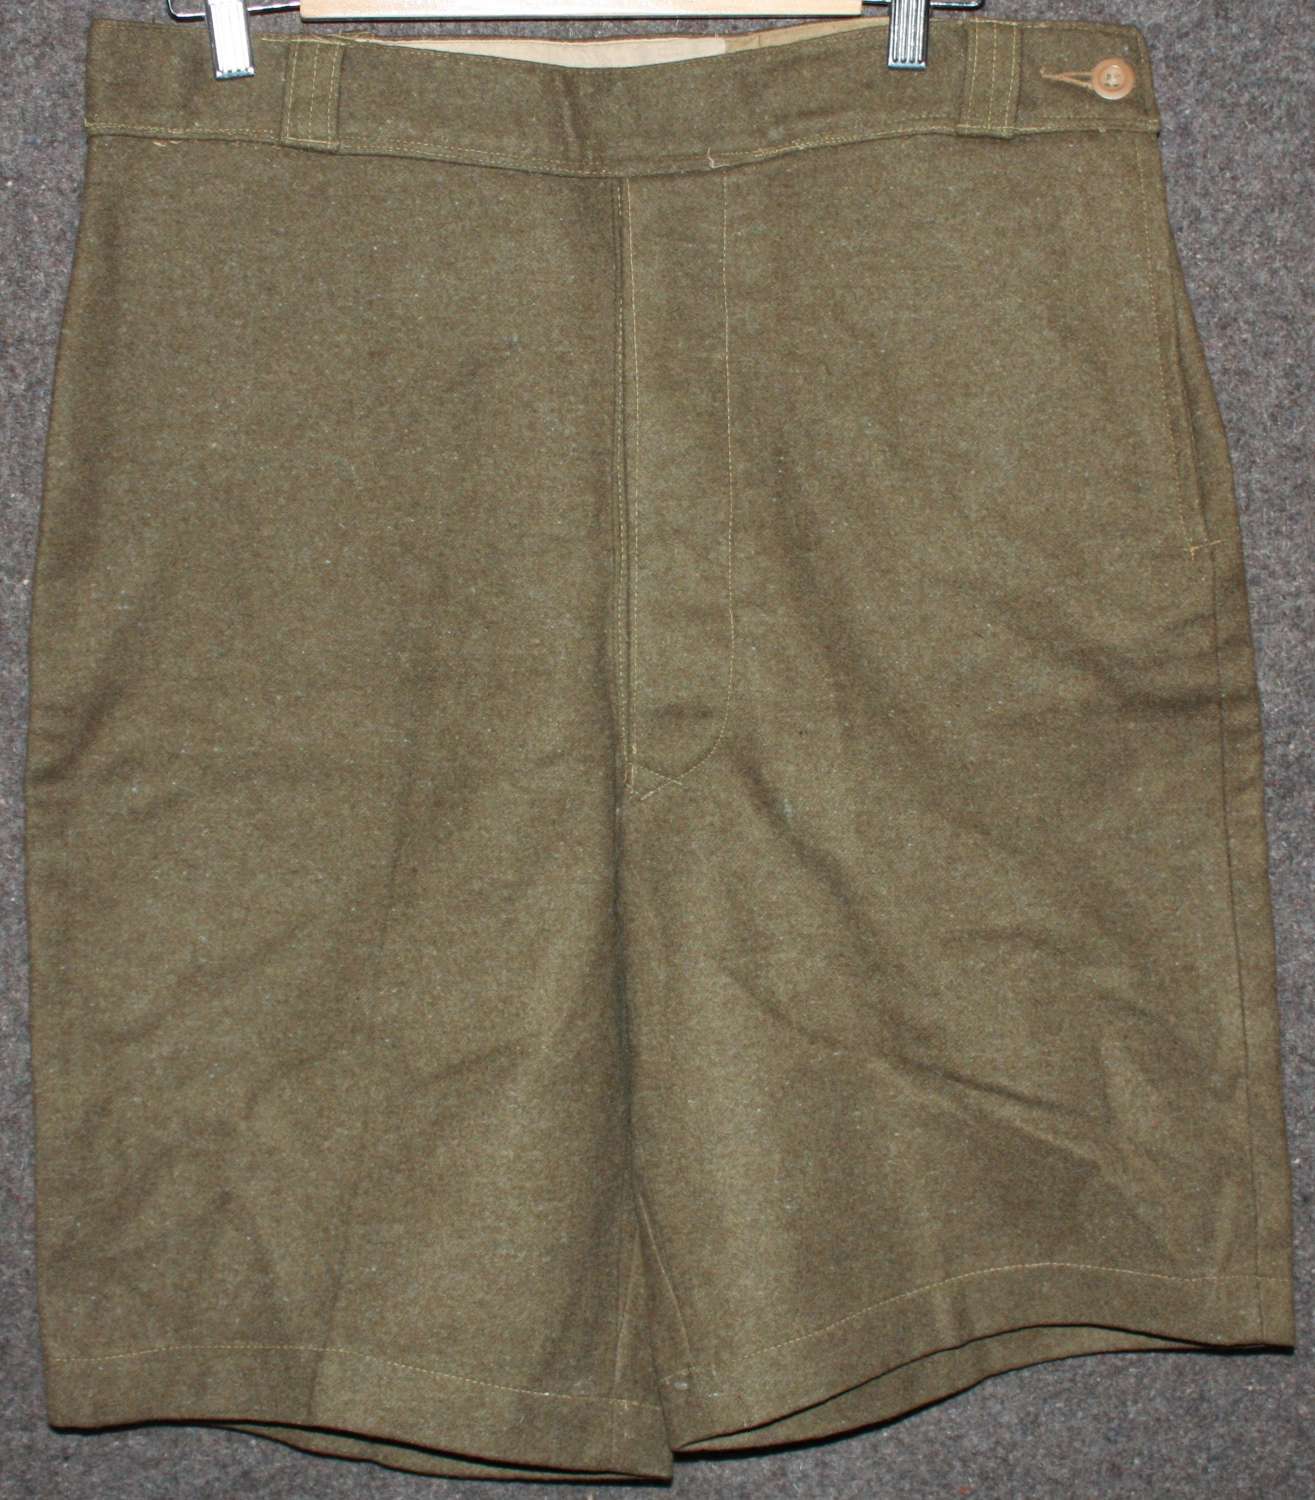 A PAIR OF THE TROPICAL ATS CONVERTED SHORTS